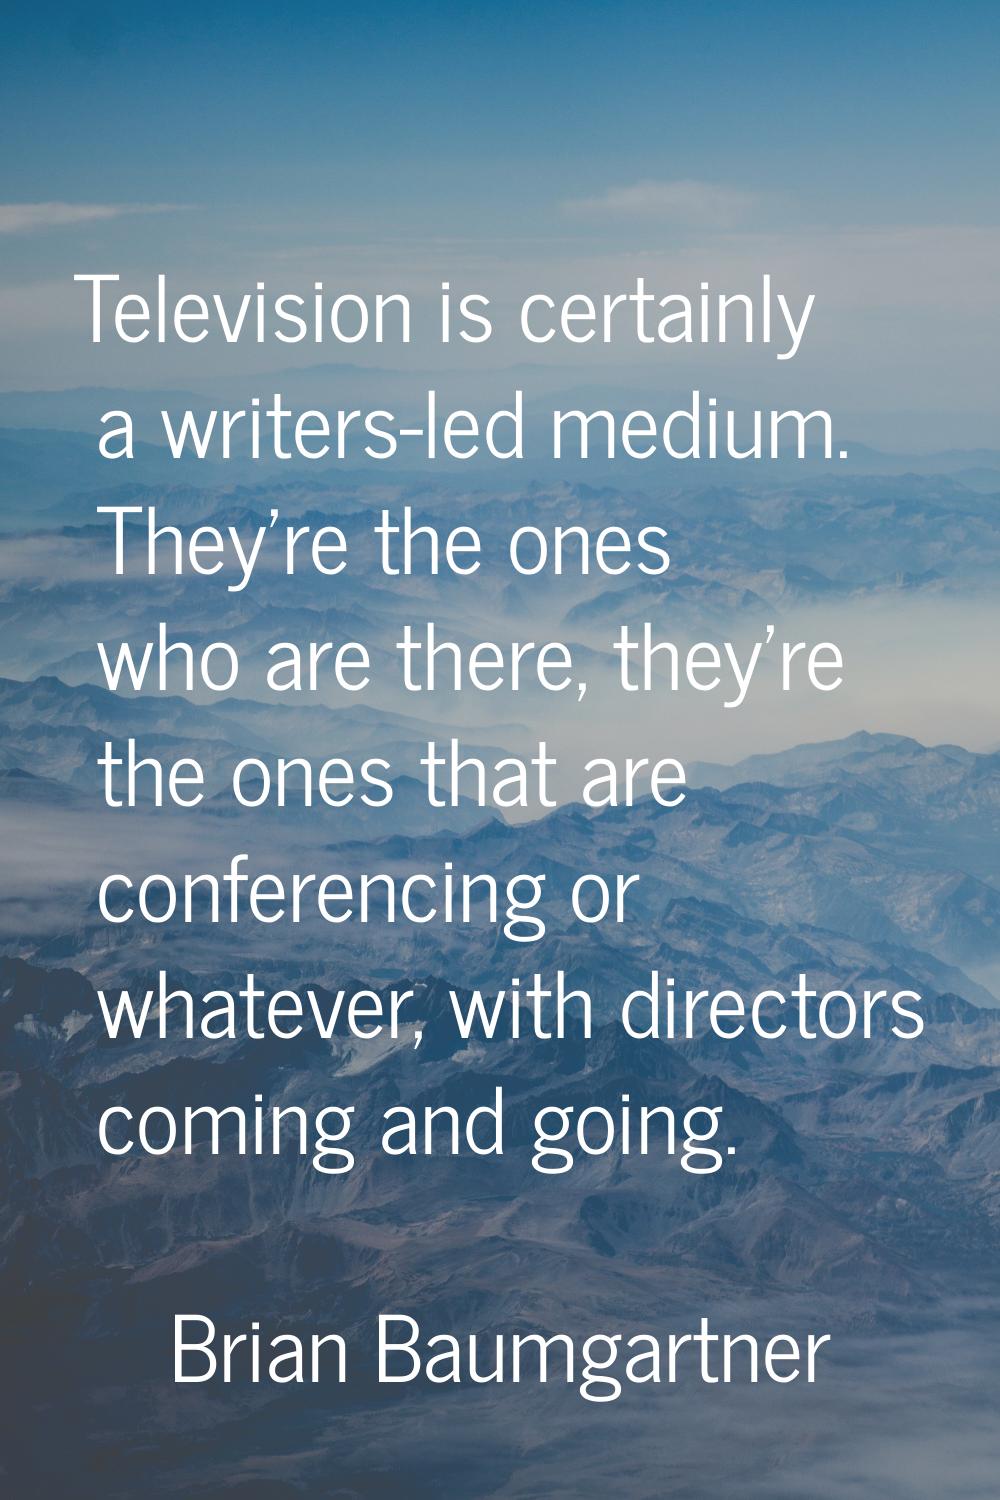 Television is certainly a writers-led medium. They're the ones who are there, they're the ones that